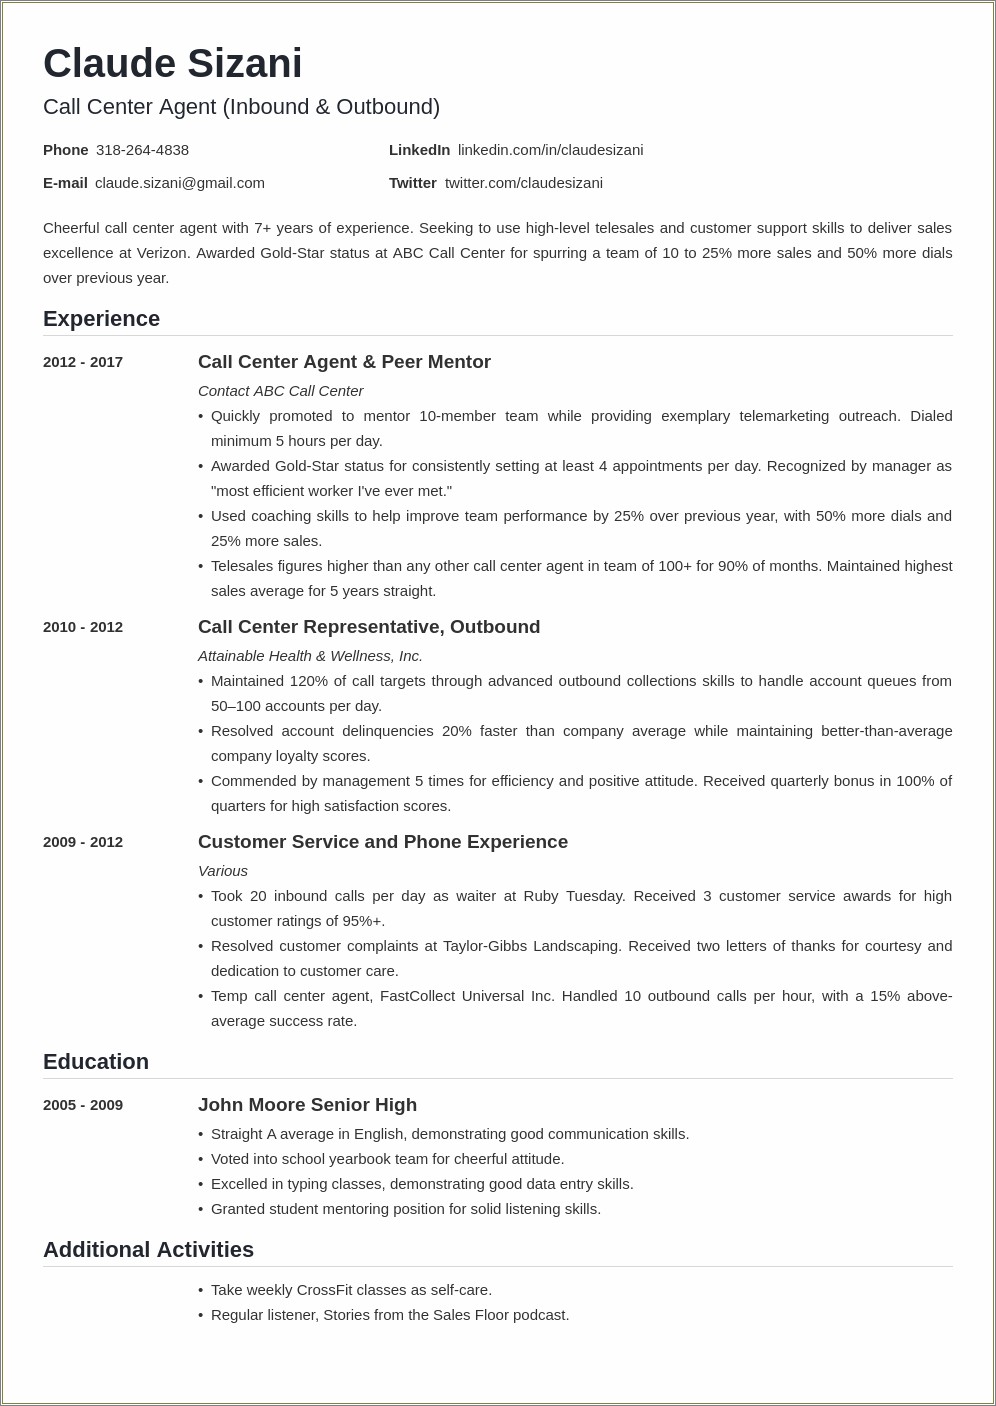 Example Resume Never Calling In Sick